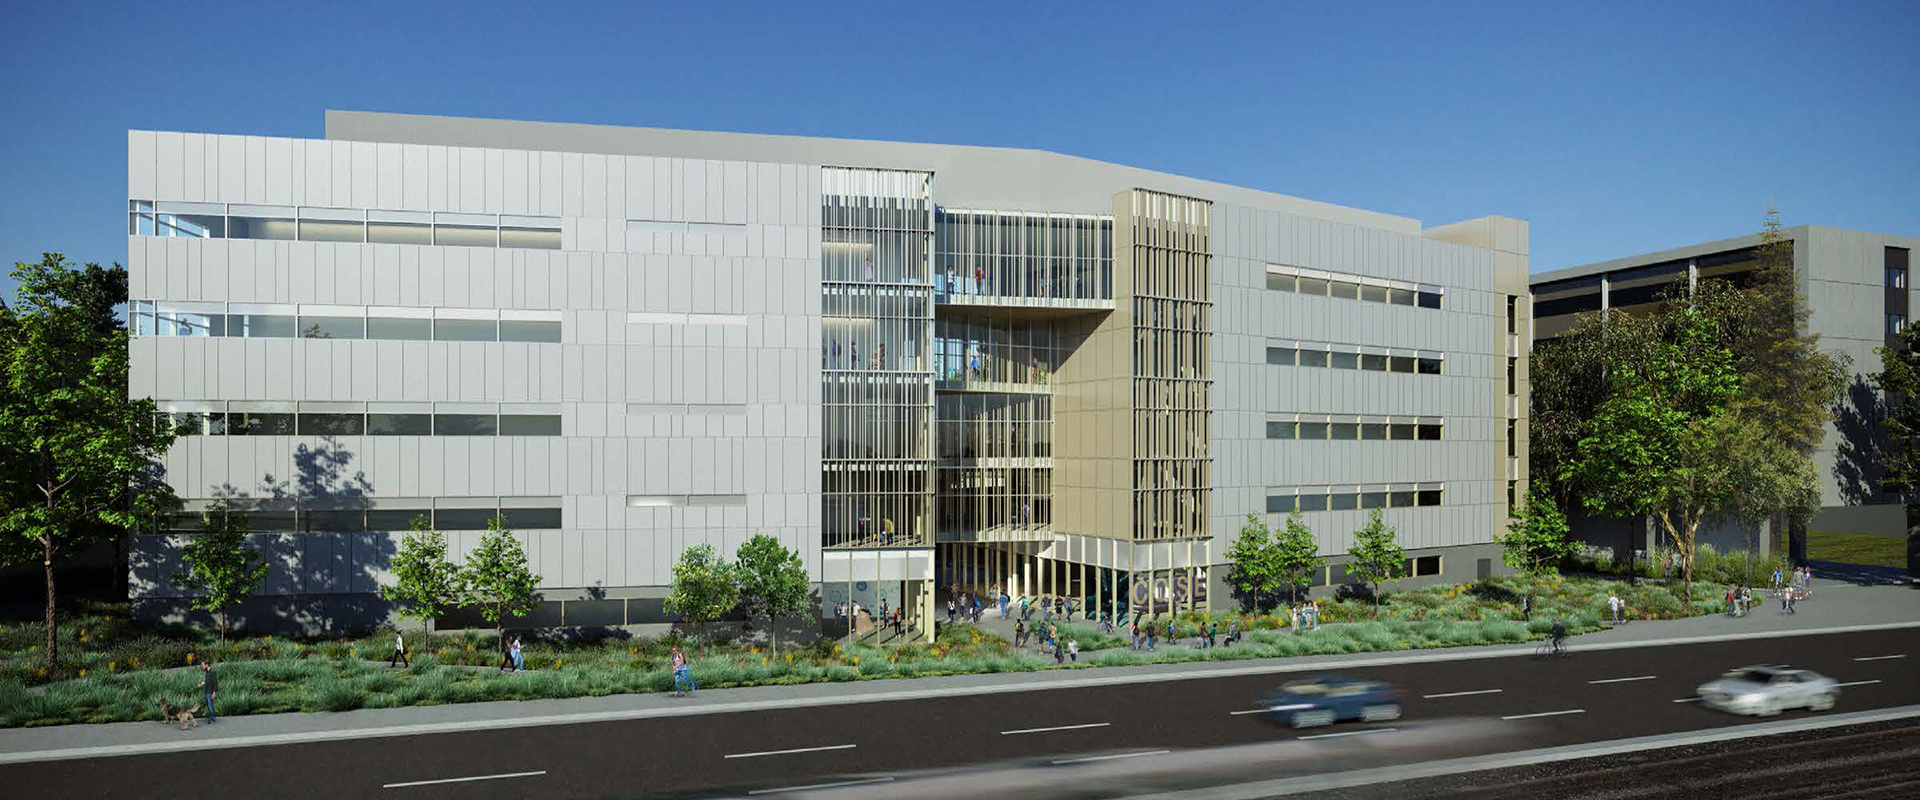 Proposed view of new building from 19th Avenue